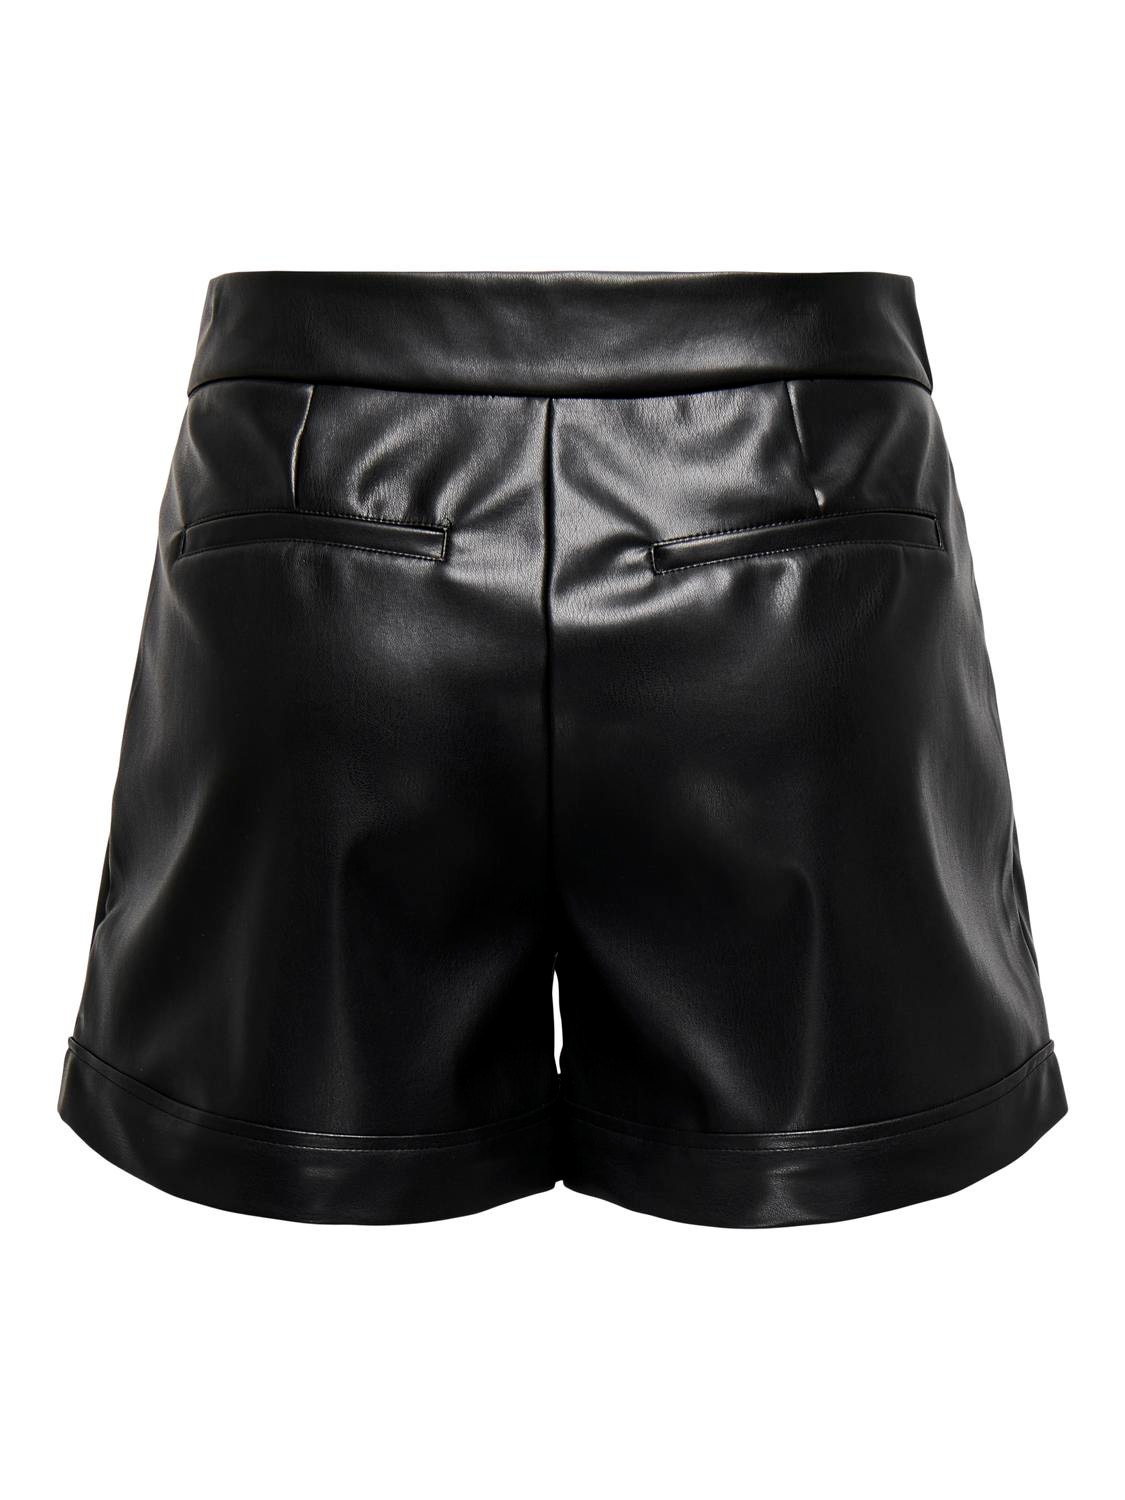 ONLY Normal geschnitten Hohe Taille Shorts -Black - 15314507